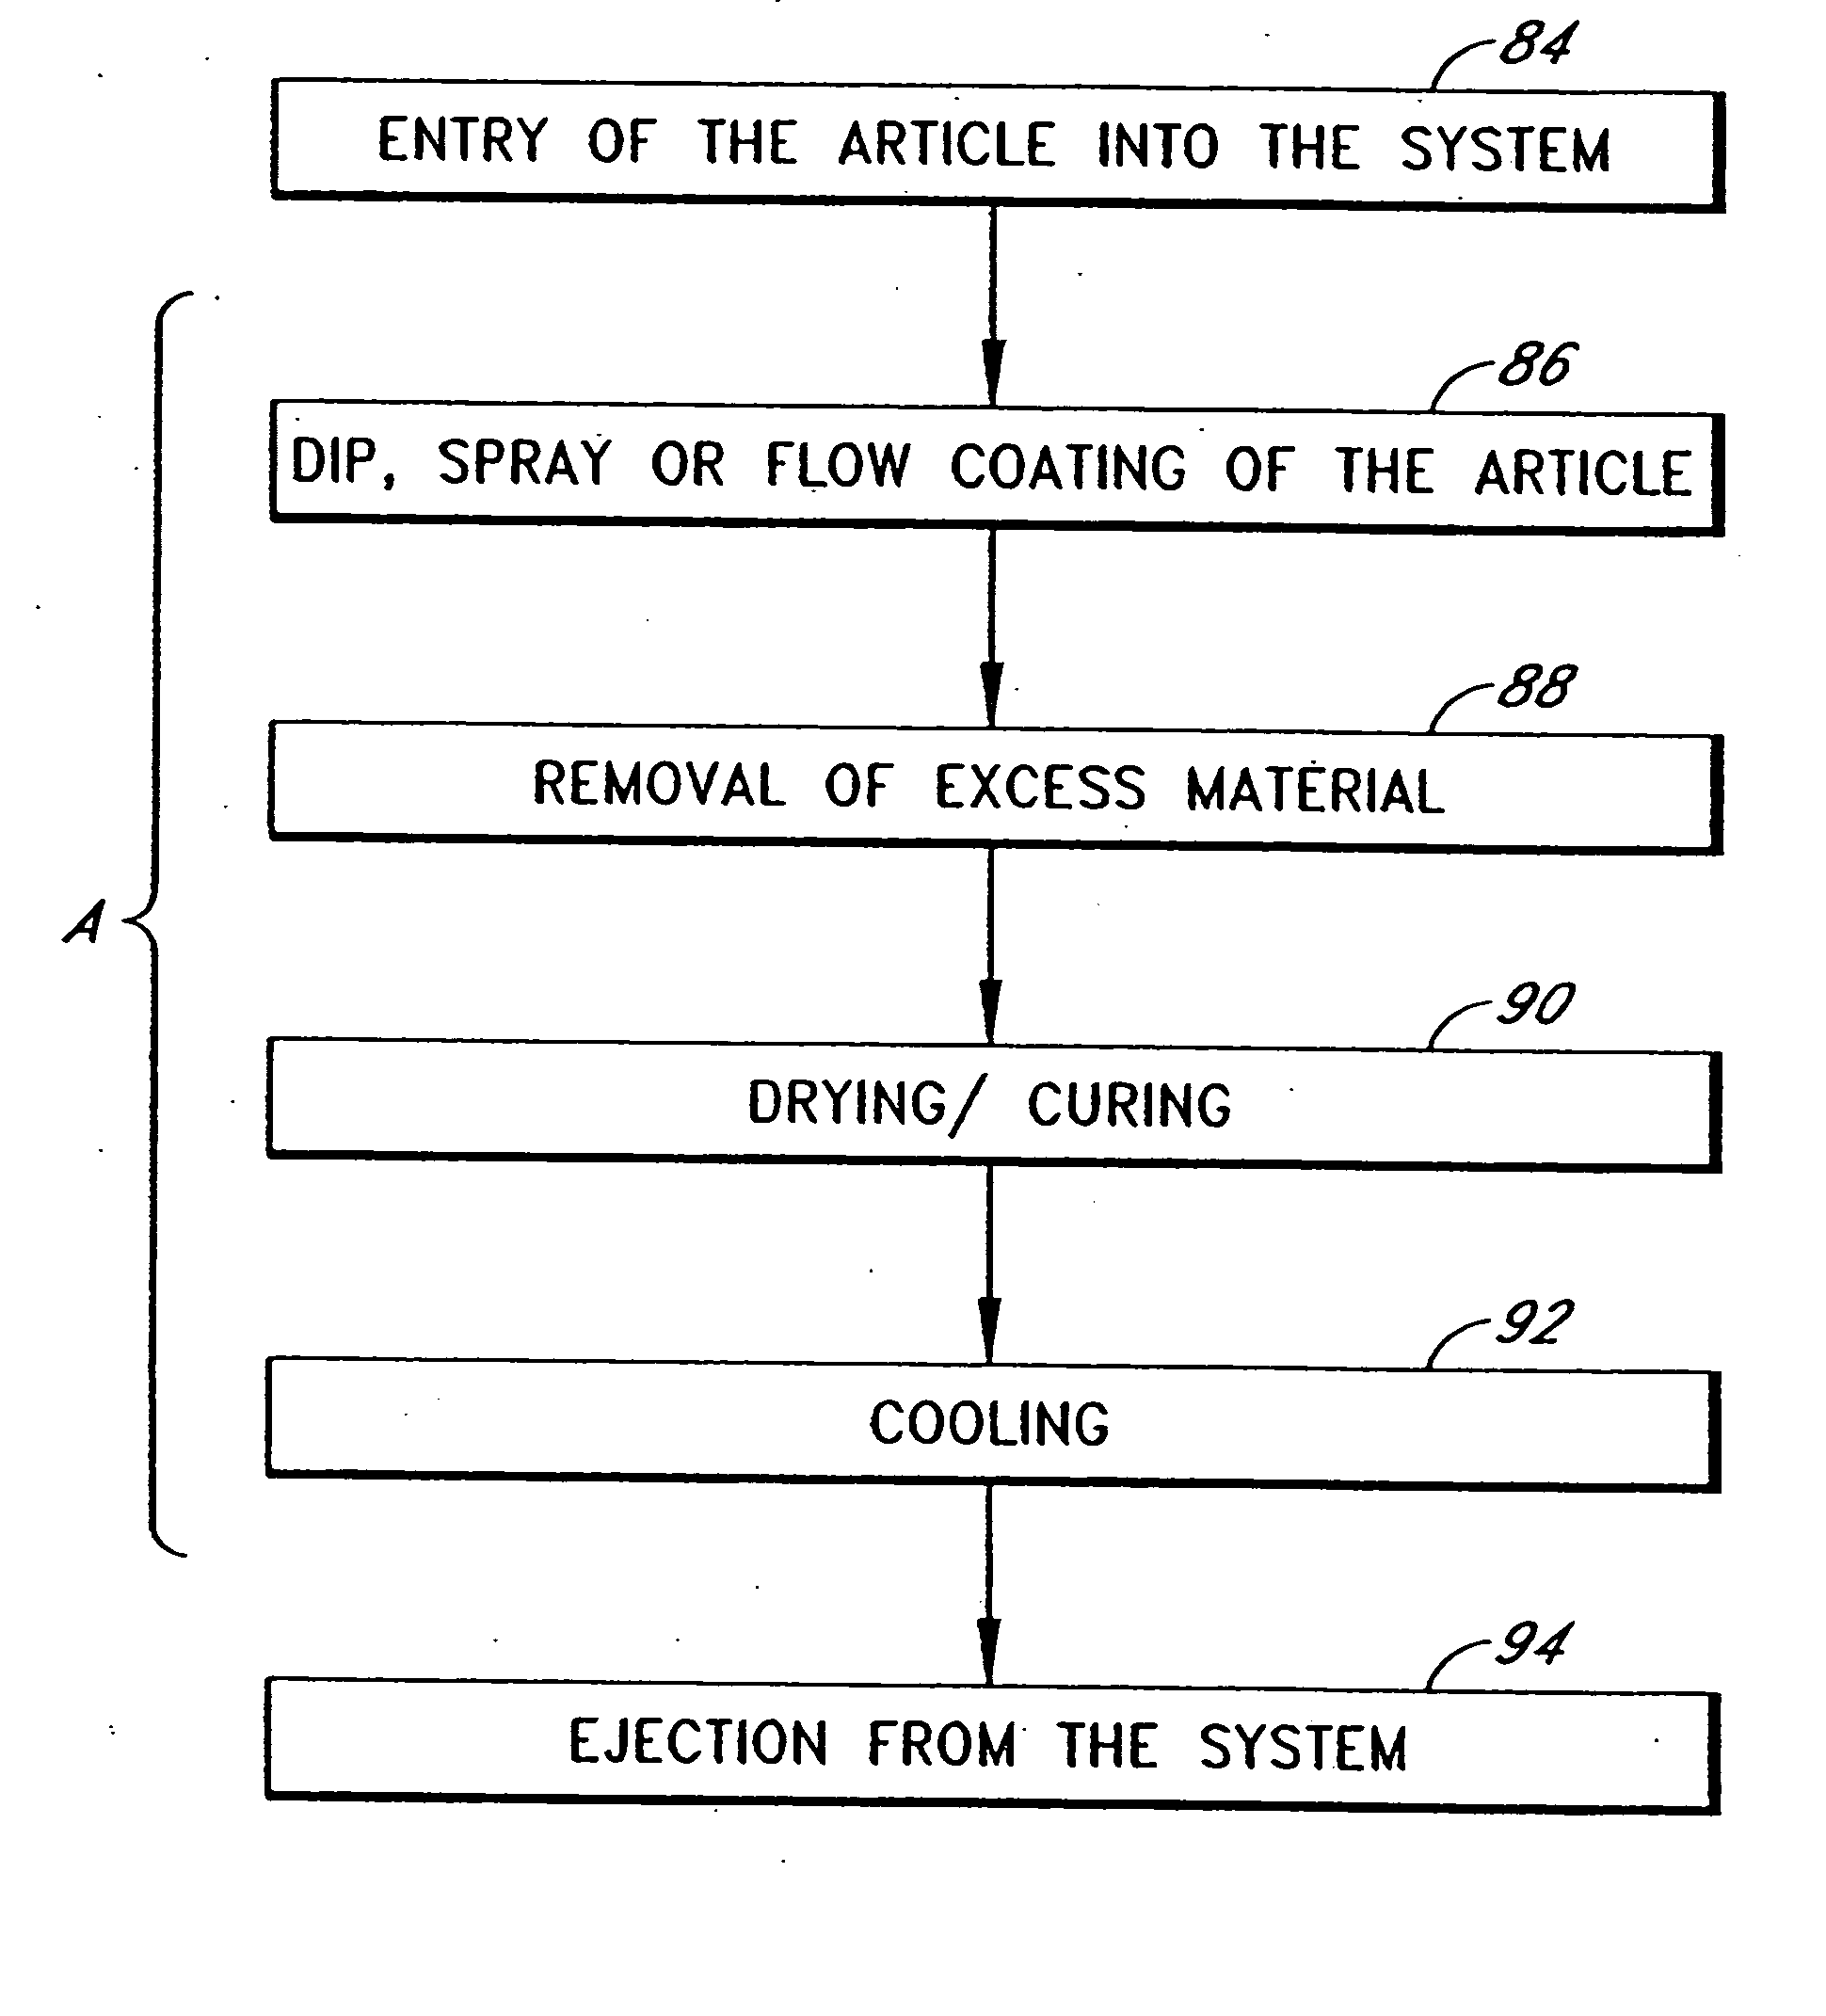 Water-resistant coated articles and methods of making same